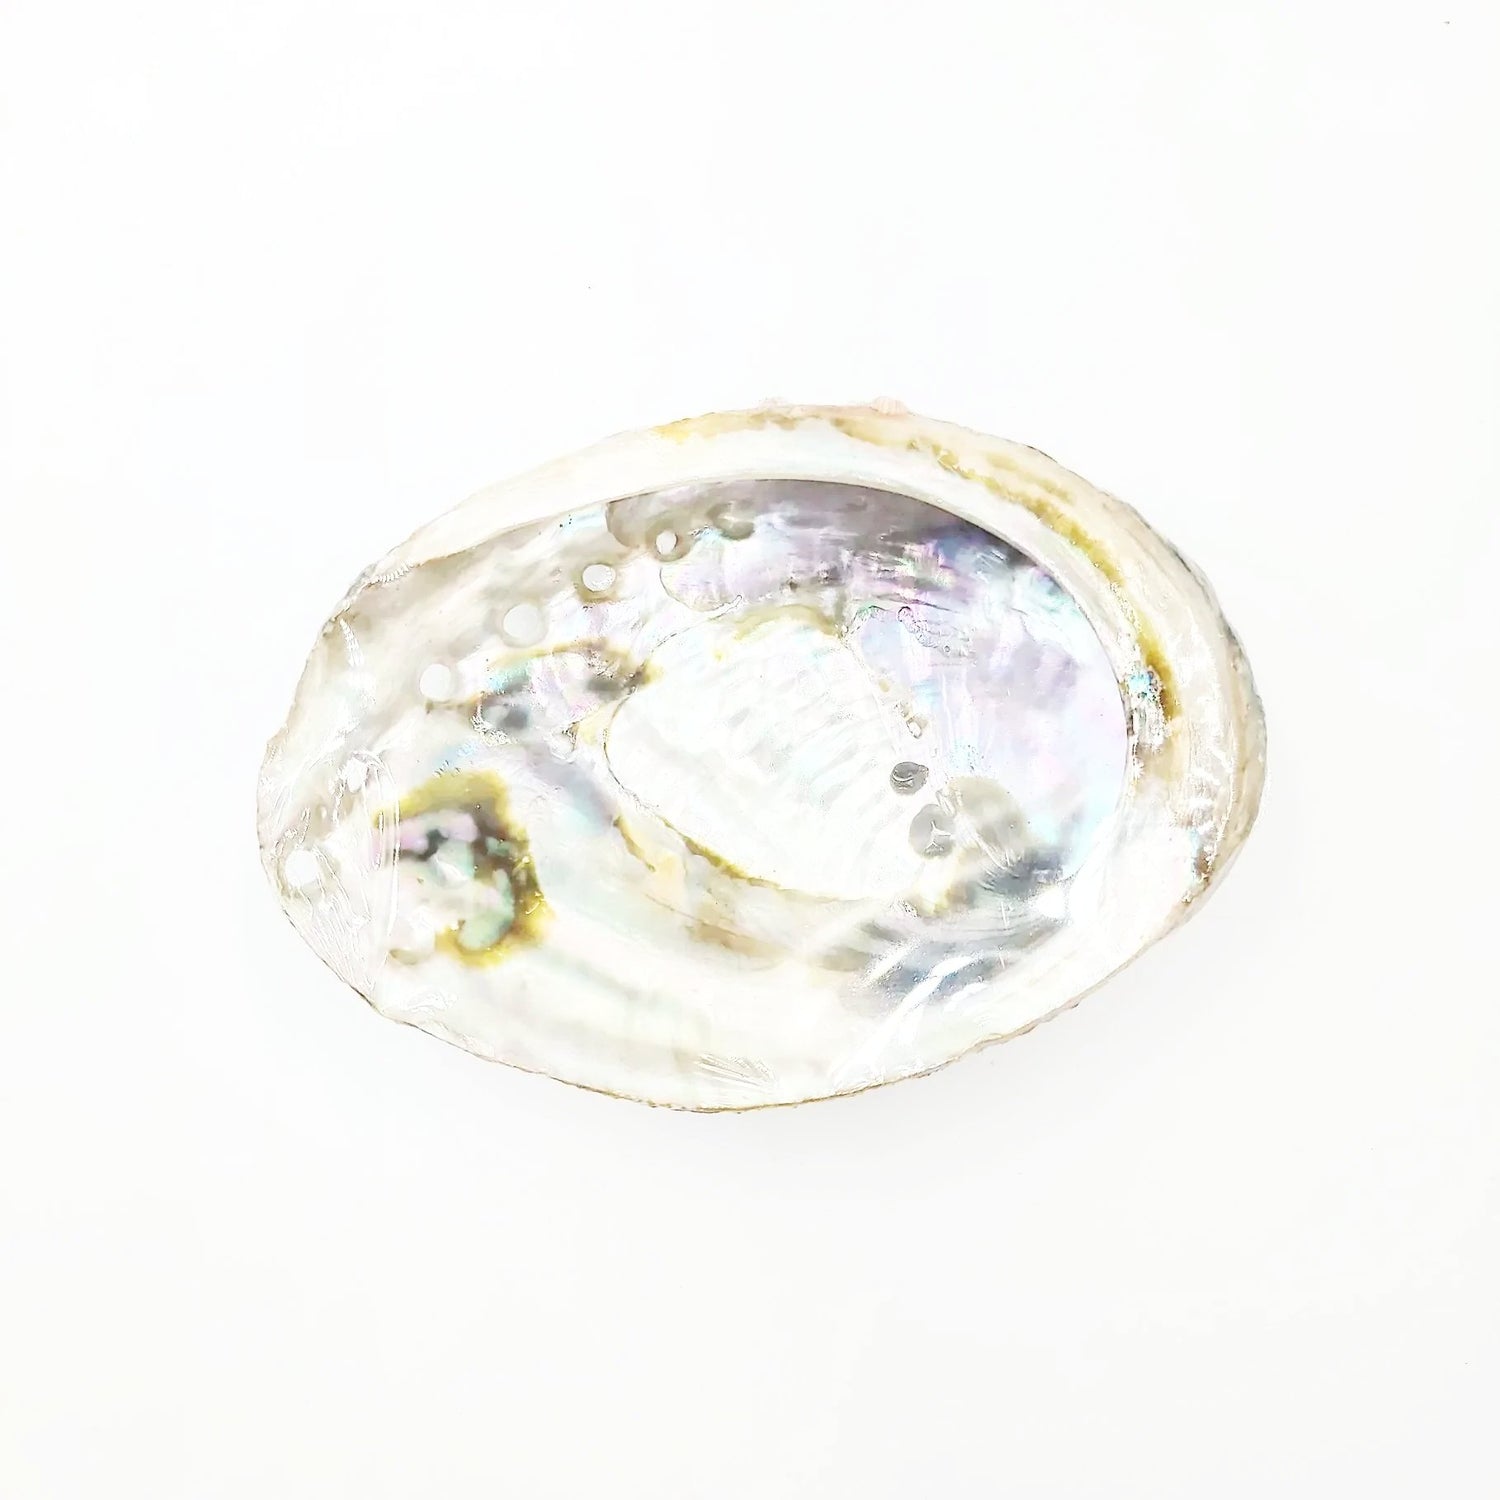 Abalone Shell 4-5" - Elevated Metaphysical